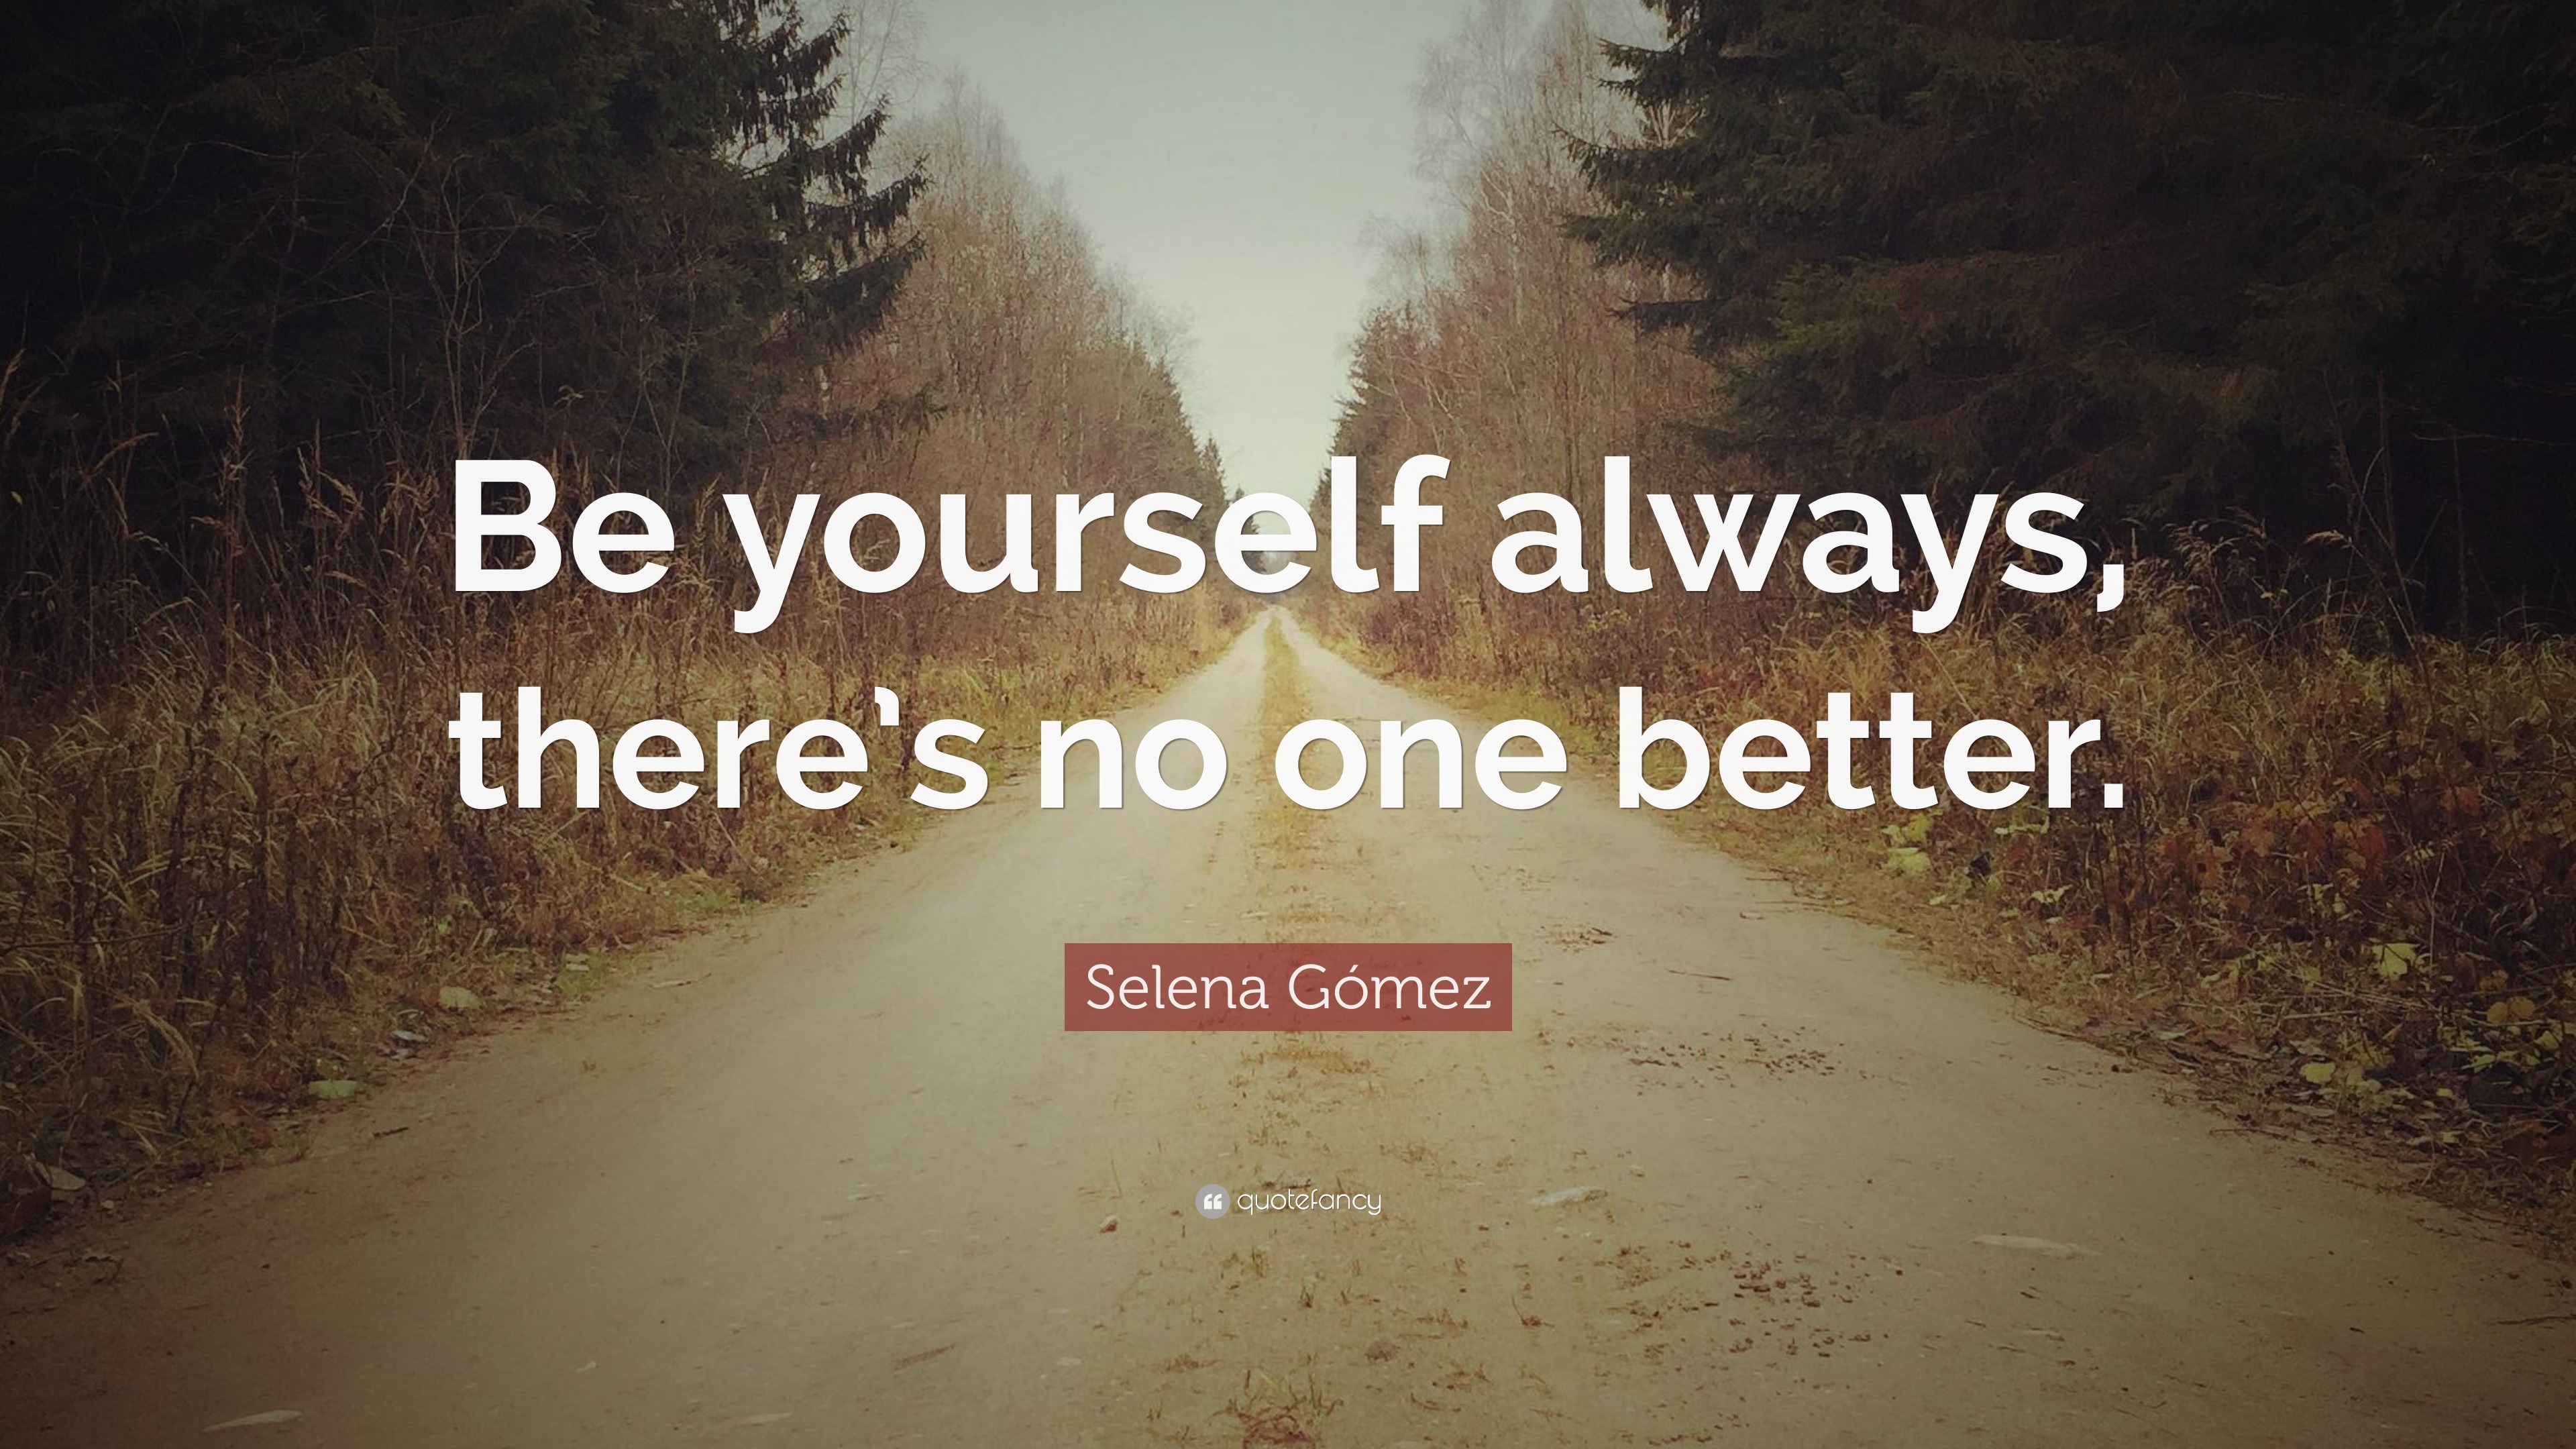 Selena Gómez Quote “be Yourself Always Theres No One Better”